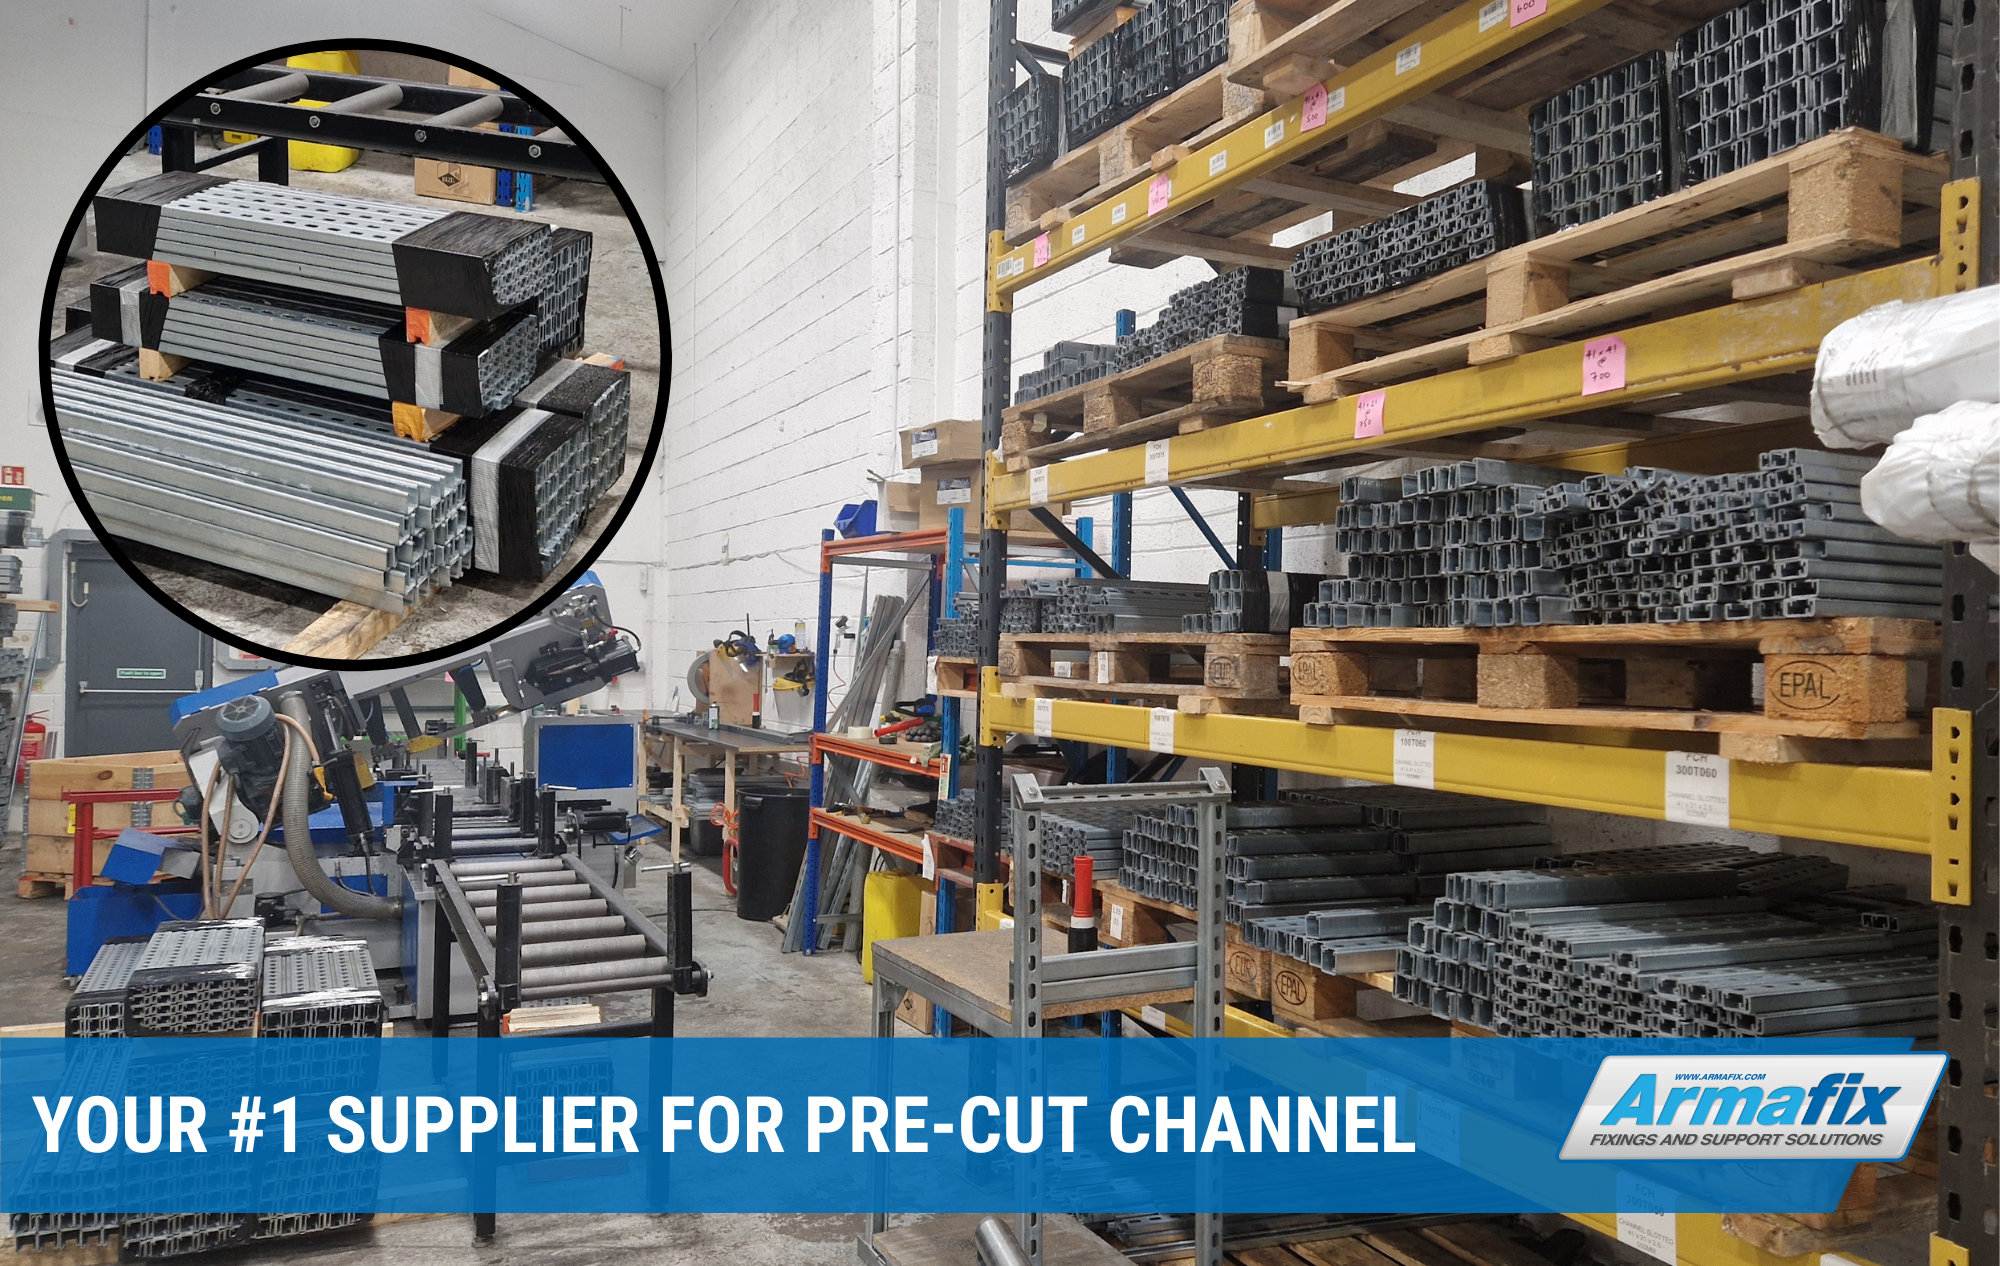 Stand out features for cut Channel & Rod you should know!